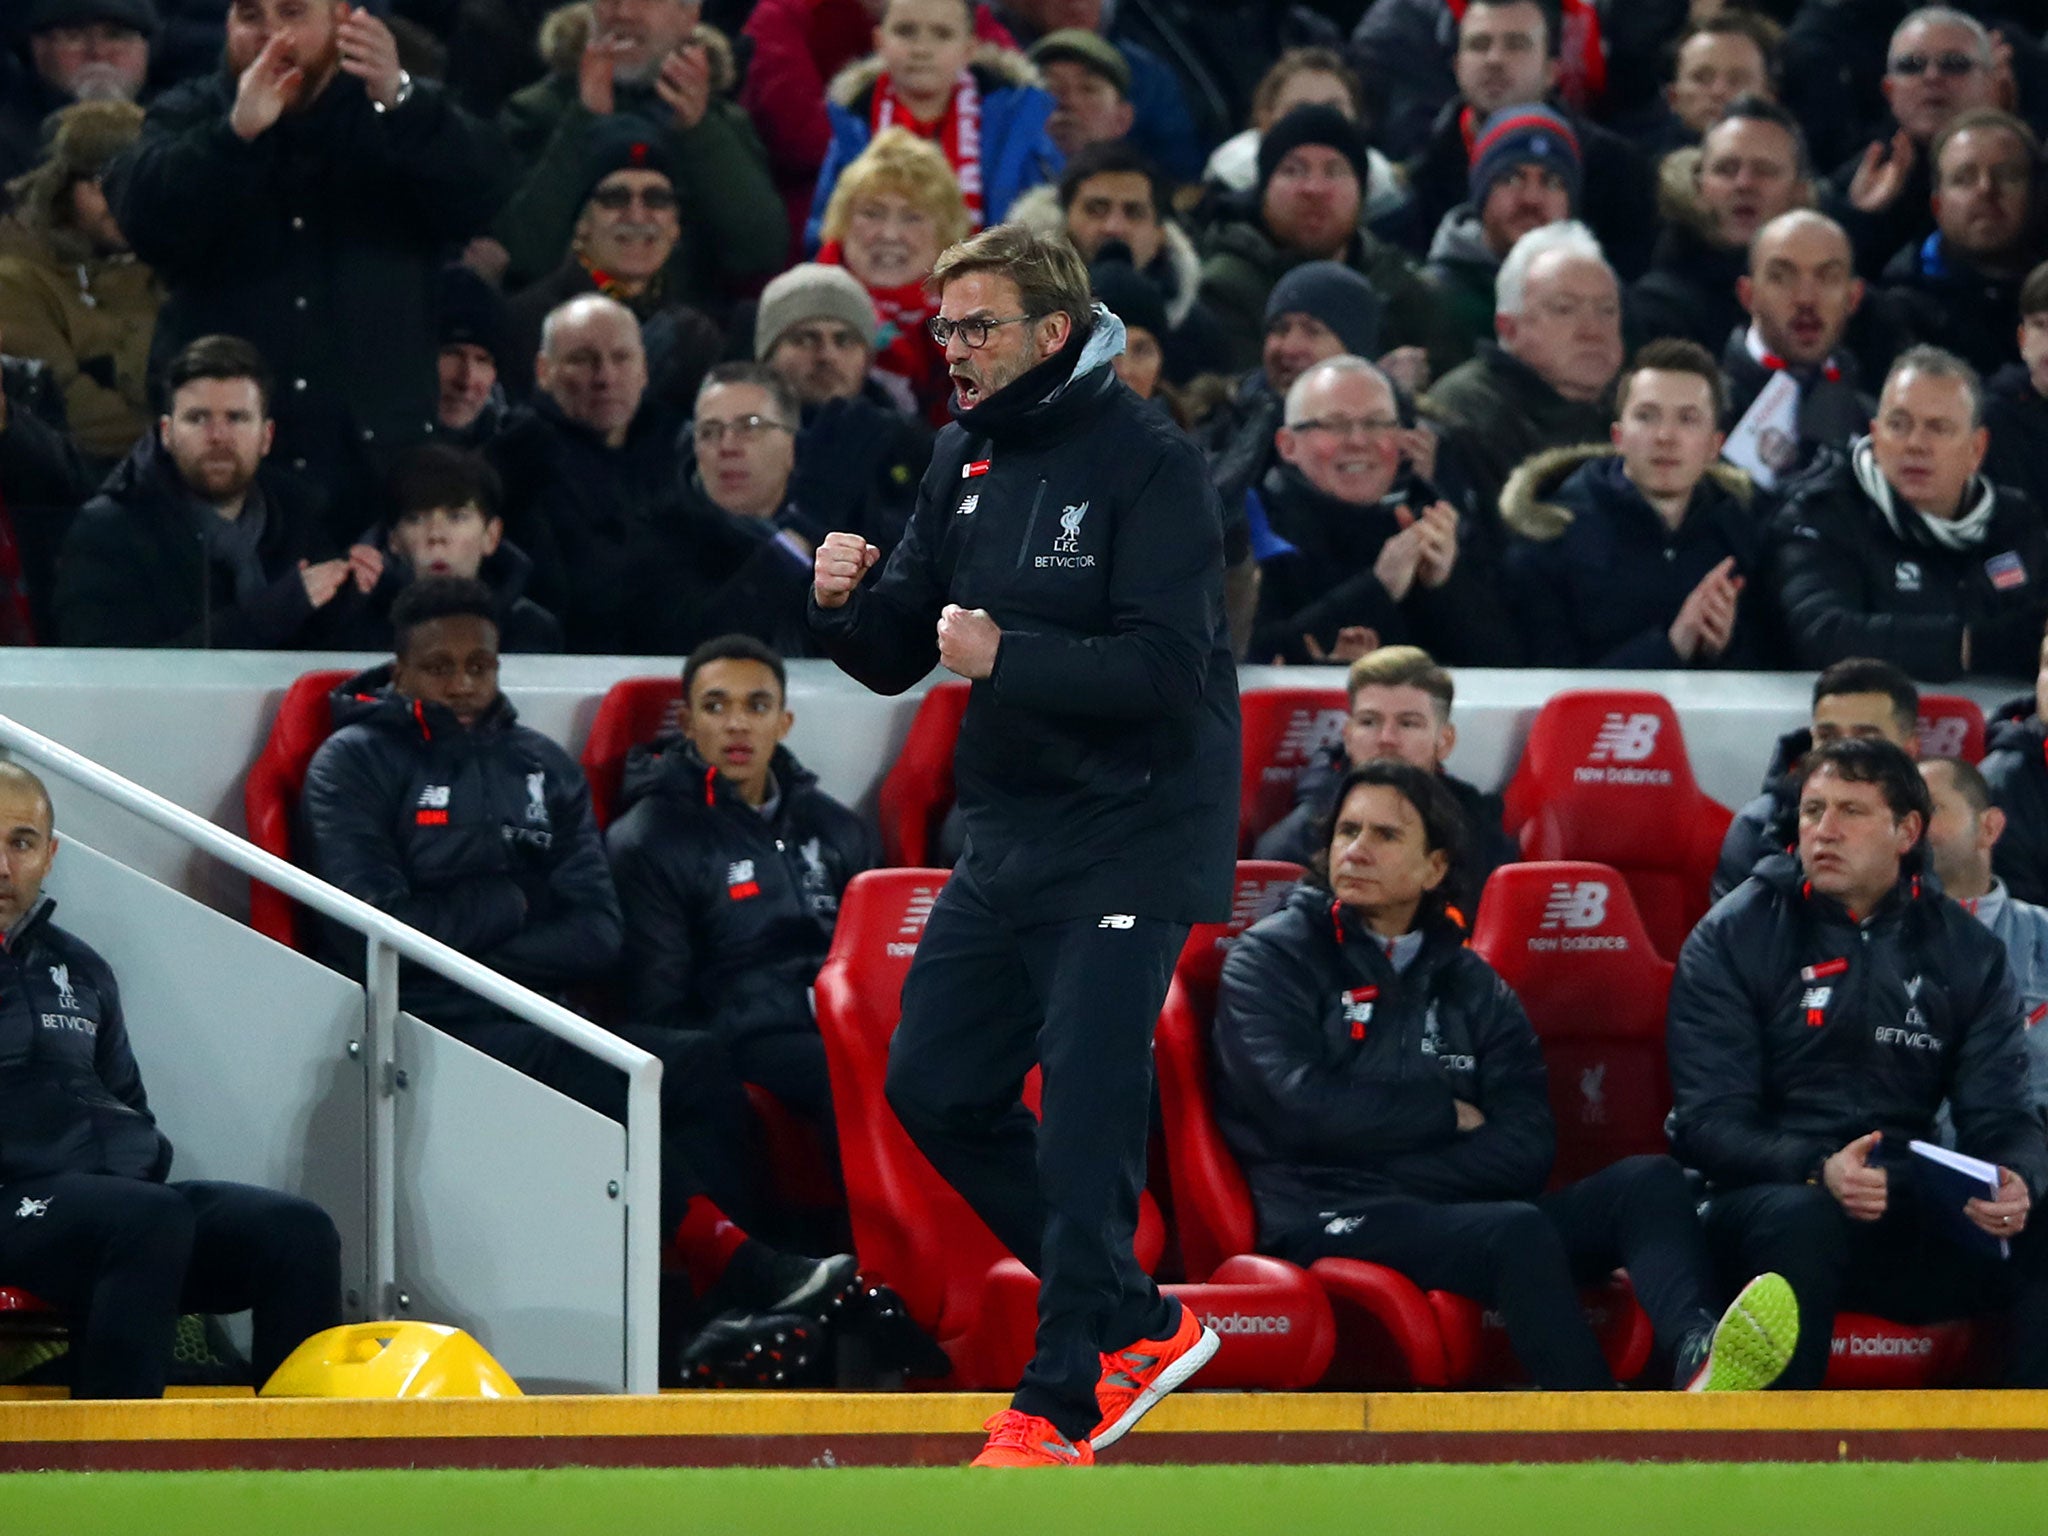 Jurgen Klopp cut an animated but delighted figure on the touchline yesterday as he watched his side beat Tottenham